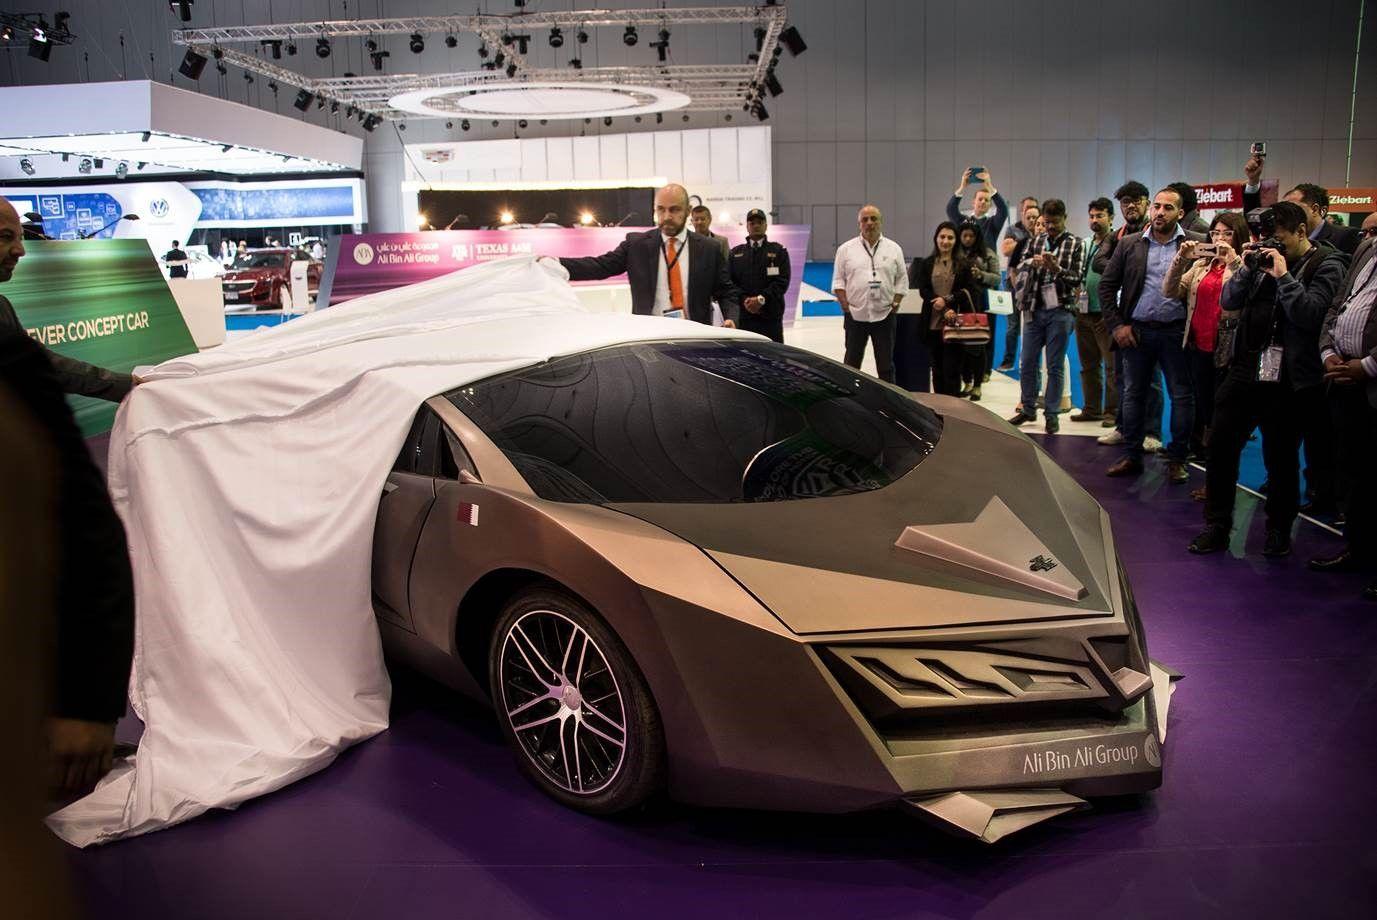 The Stealth Jet Supercar: Qatar Unveils Its First Megacar with Carbon Fiber Body and Metallic Gold Paint - amazingmindscape.com